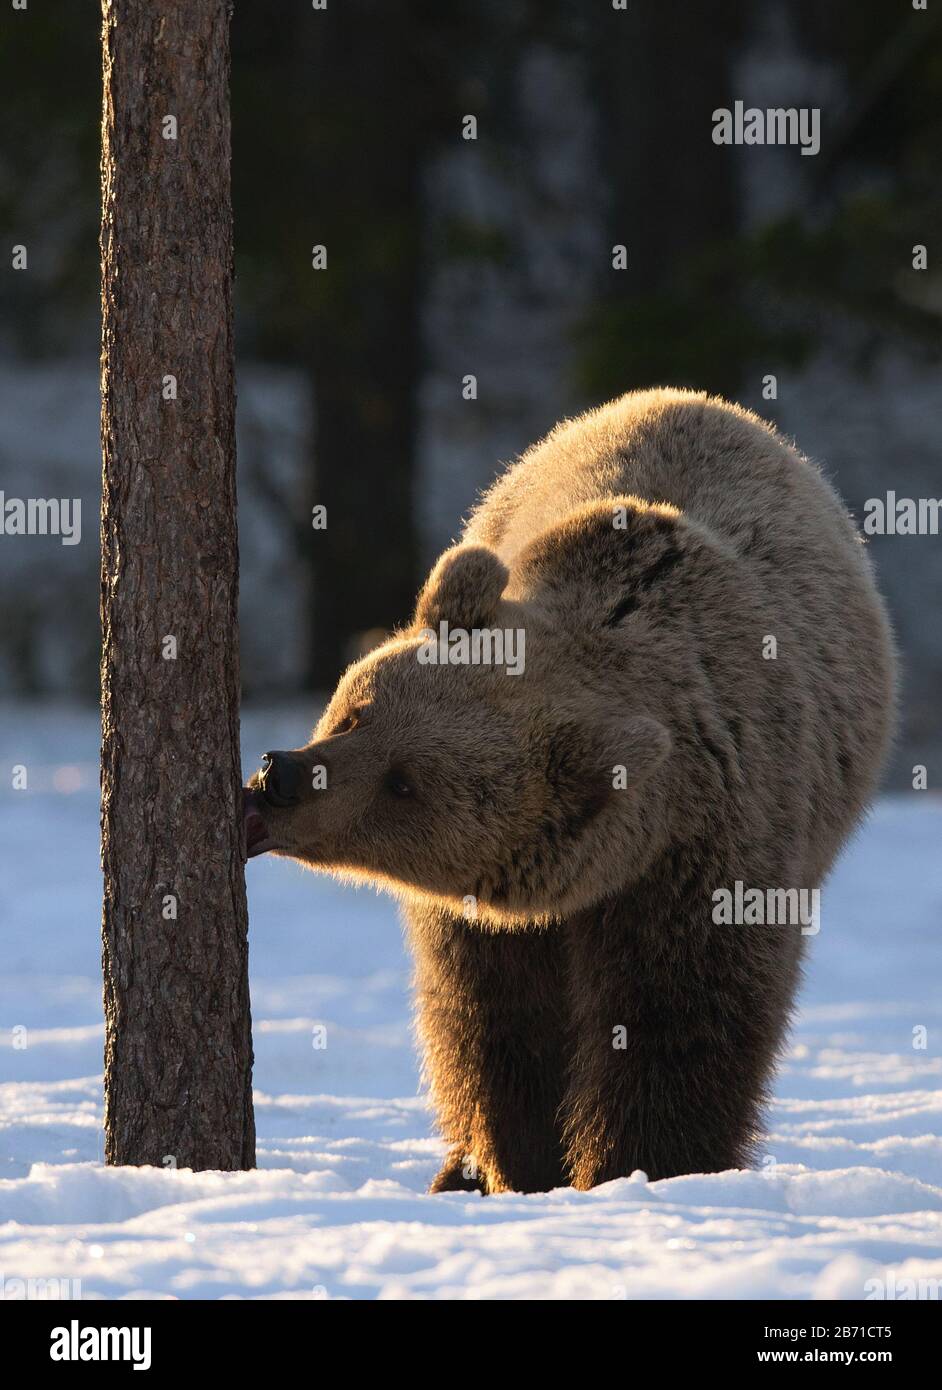 Bear licks the pine tree in winter forest. Front view, backlit, sunset light.  Scientific name: Ursus Arctos. Natural Habitat. Stock Photo